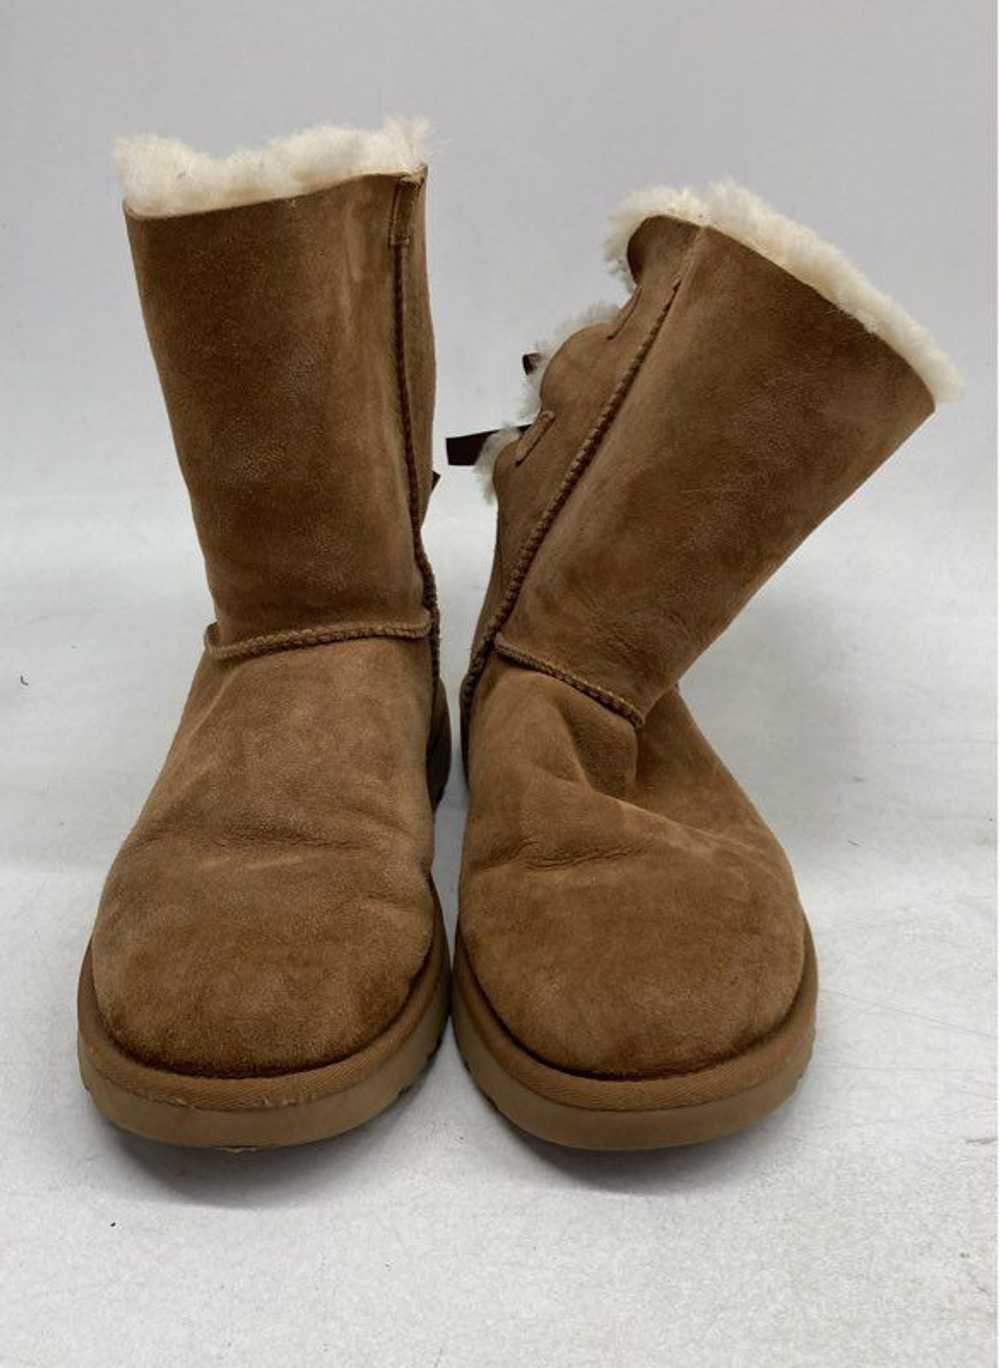 Women's Ugg Size 9 Bailey Bow Boots - image 3